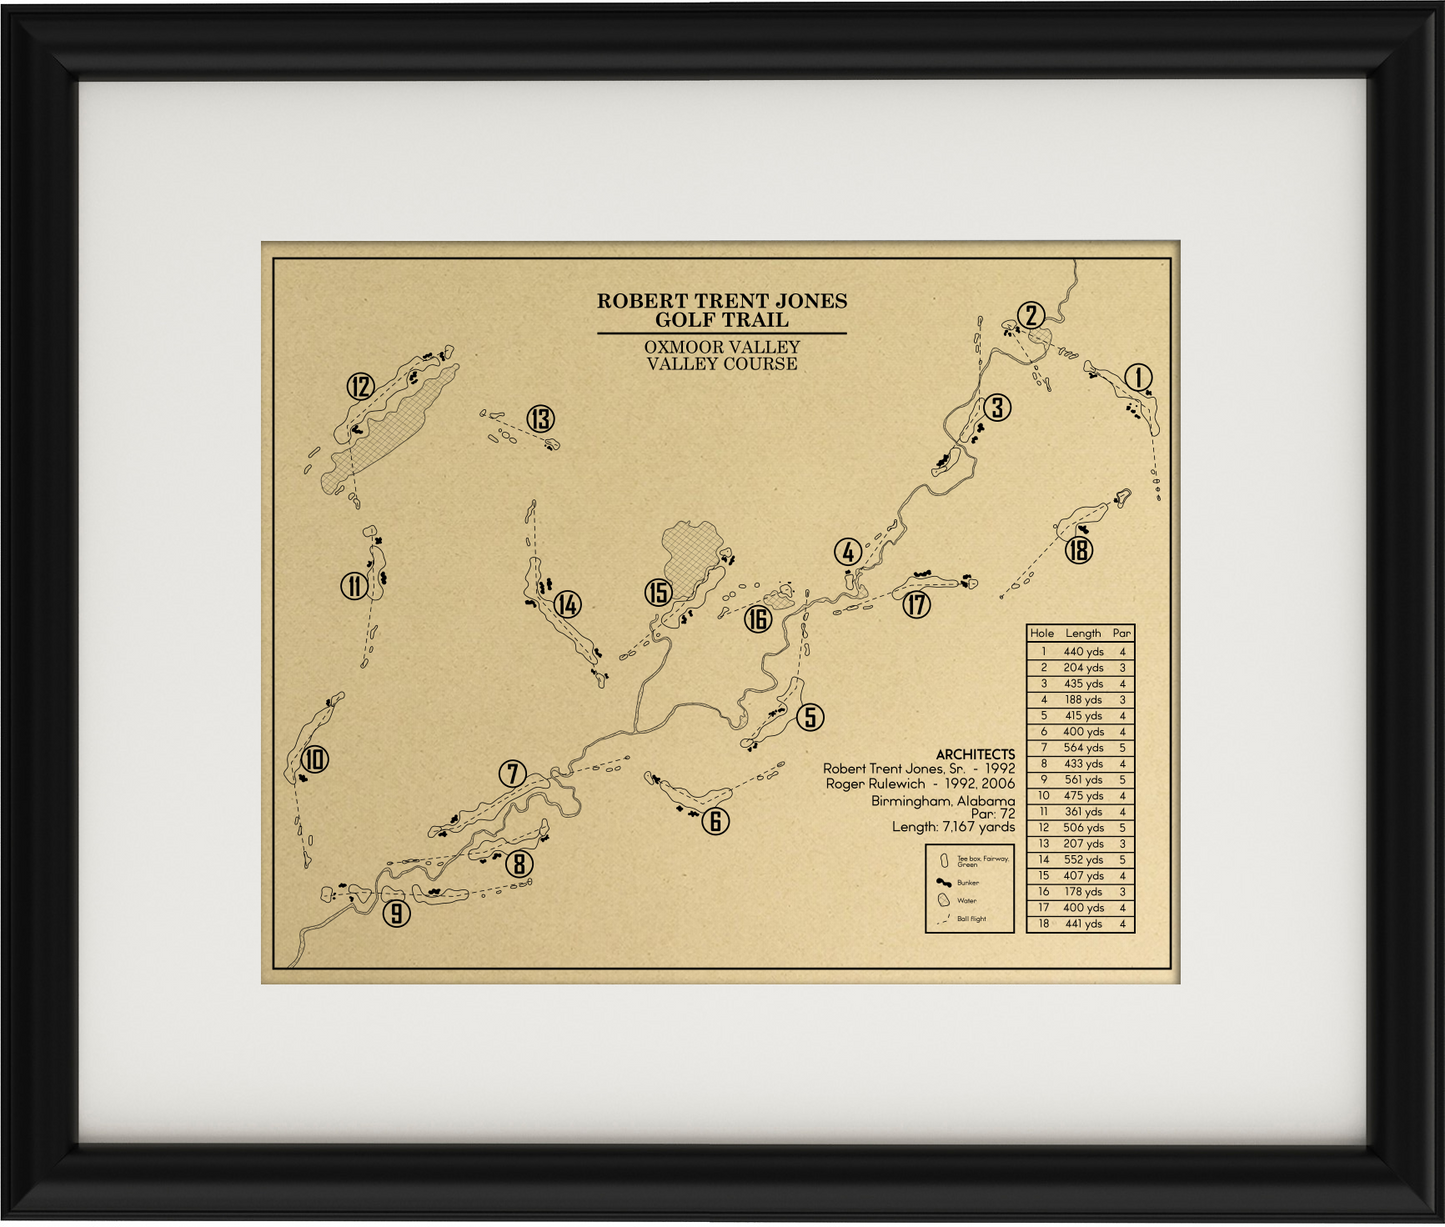 RTJ Golf Trail Oxmoor Valley Valley Course Outline (Print)